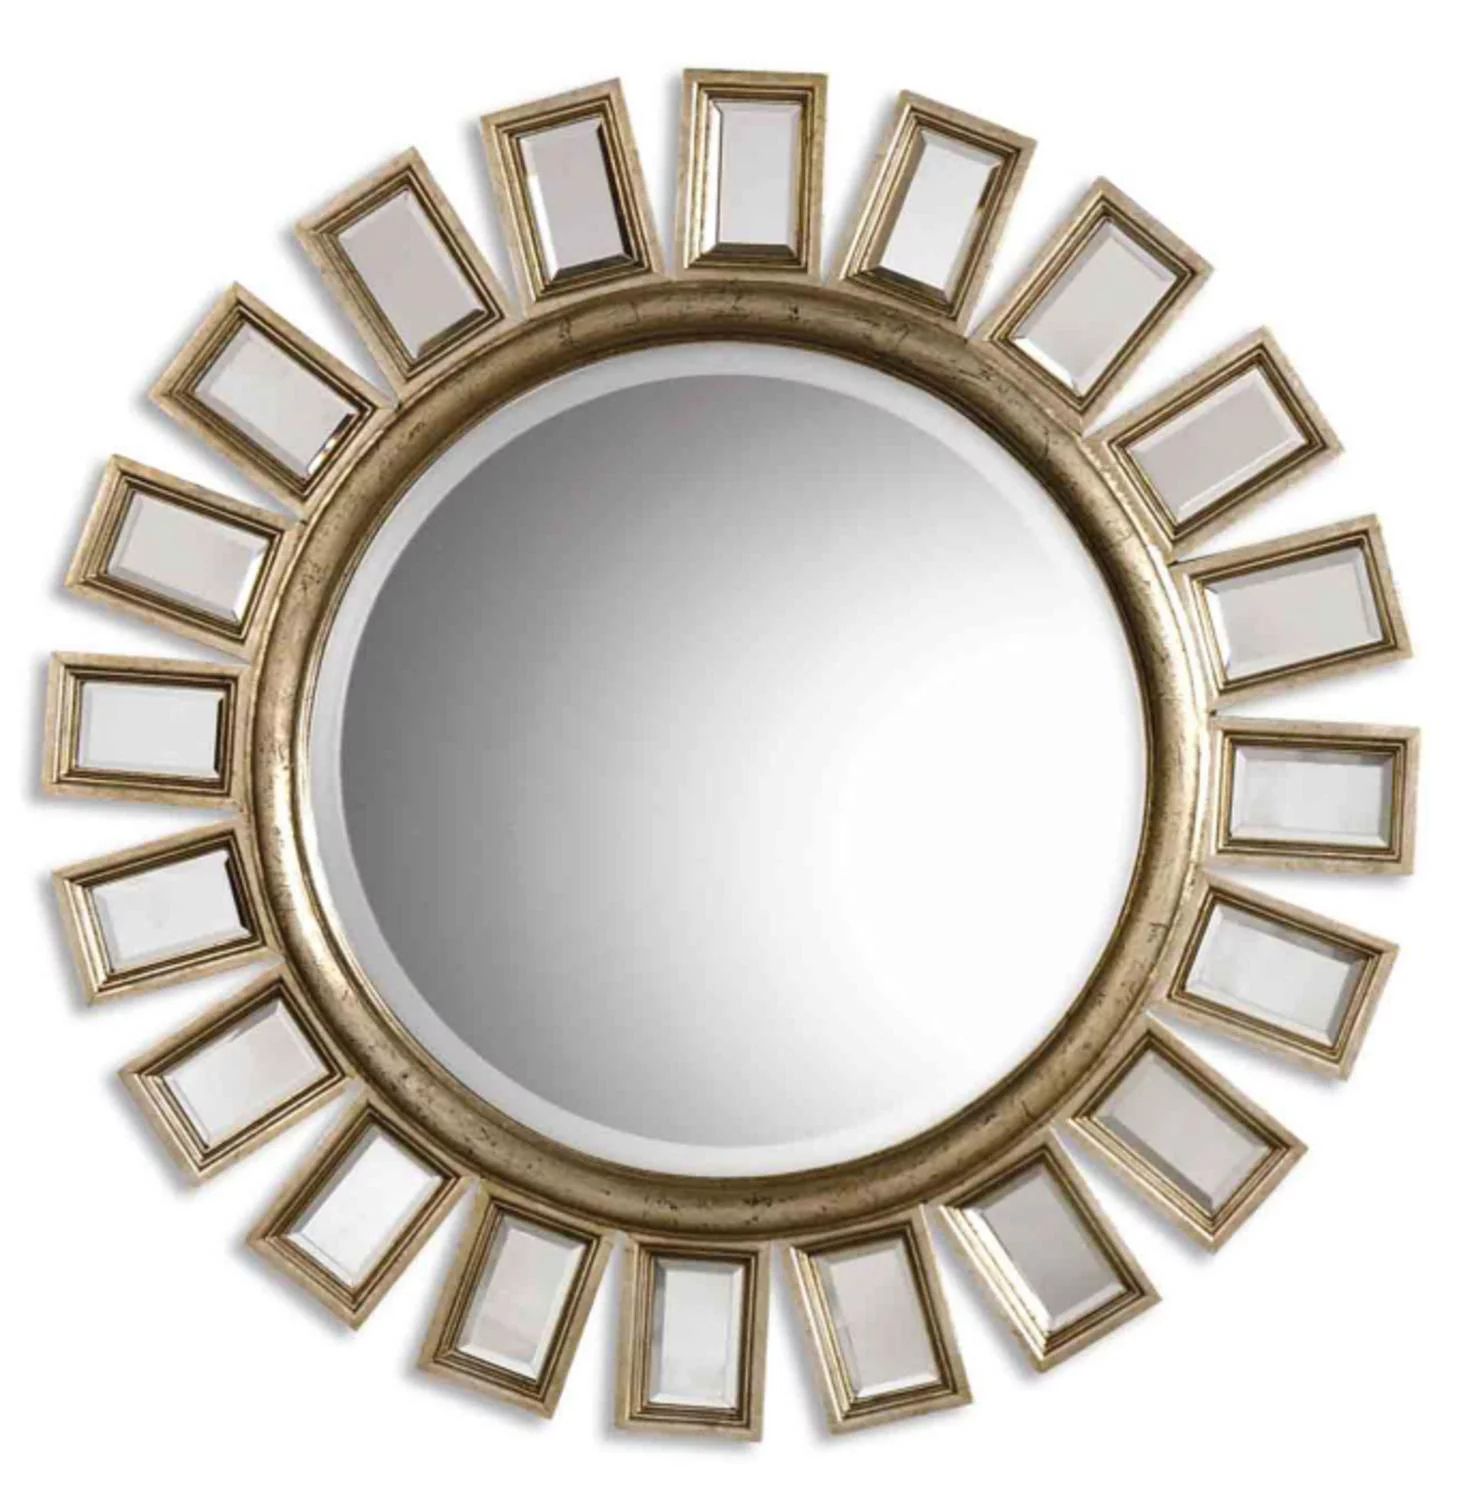 34" Distressed Silver Leaf Finish With Small Mirrors Framed Round Wall Intended For Silver Quatrefoil Wall Mirrors (View 1 of 15)